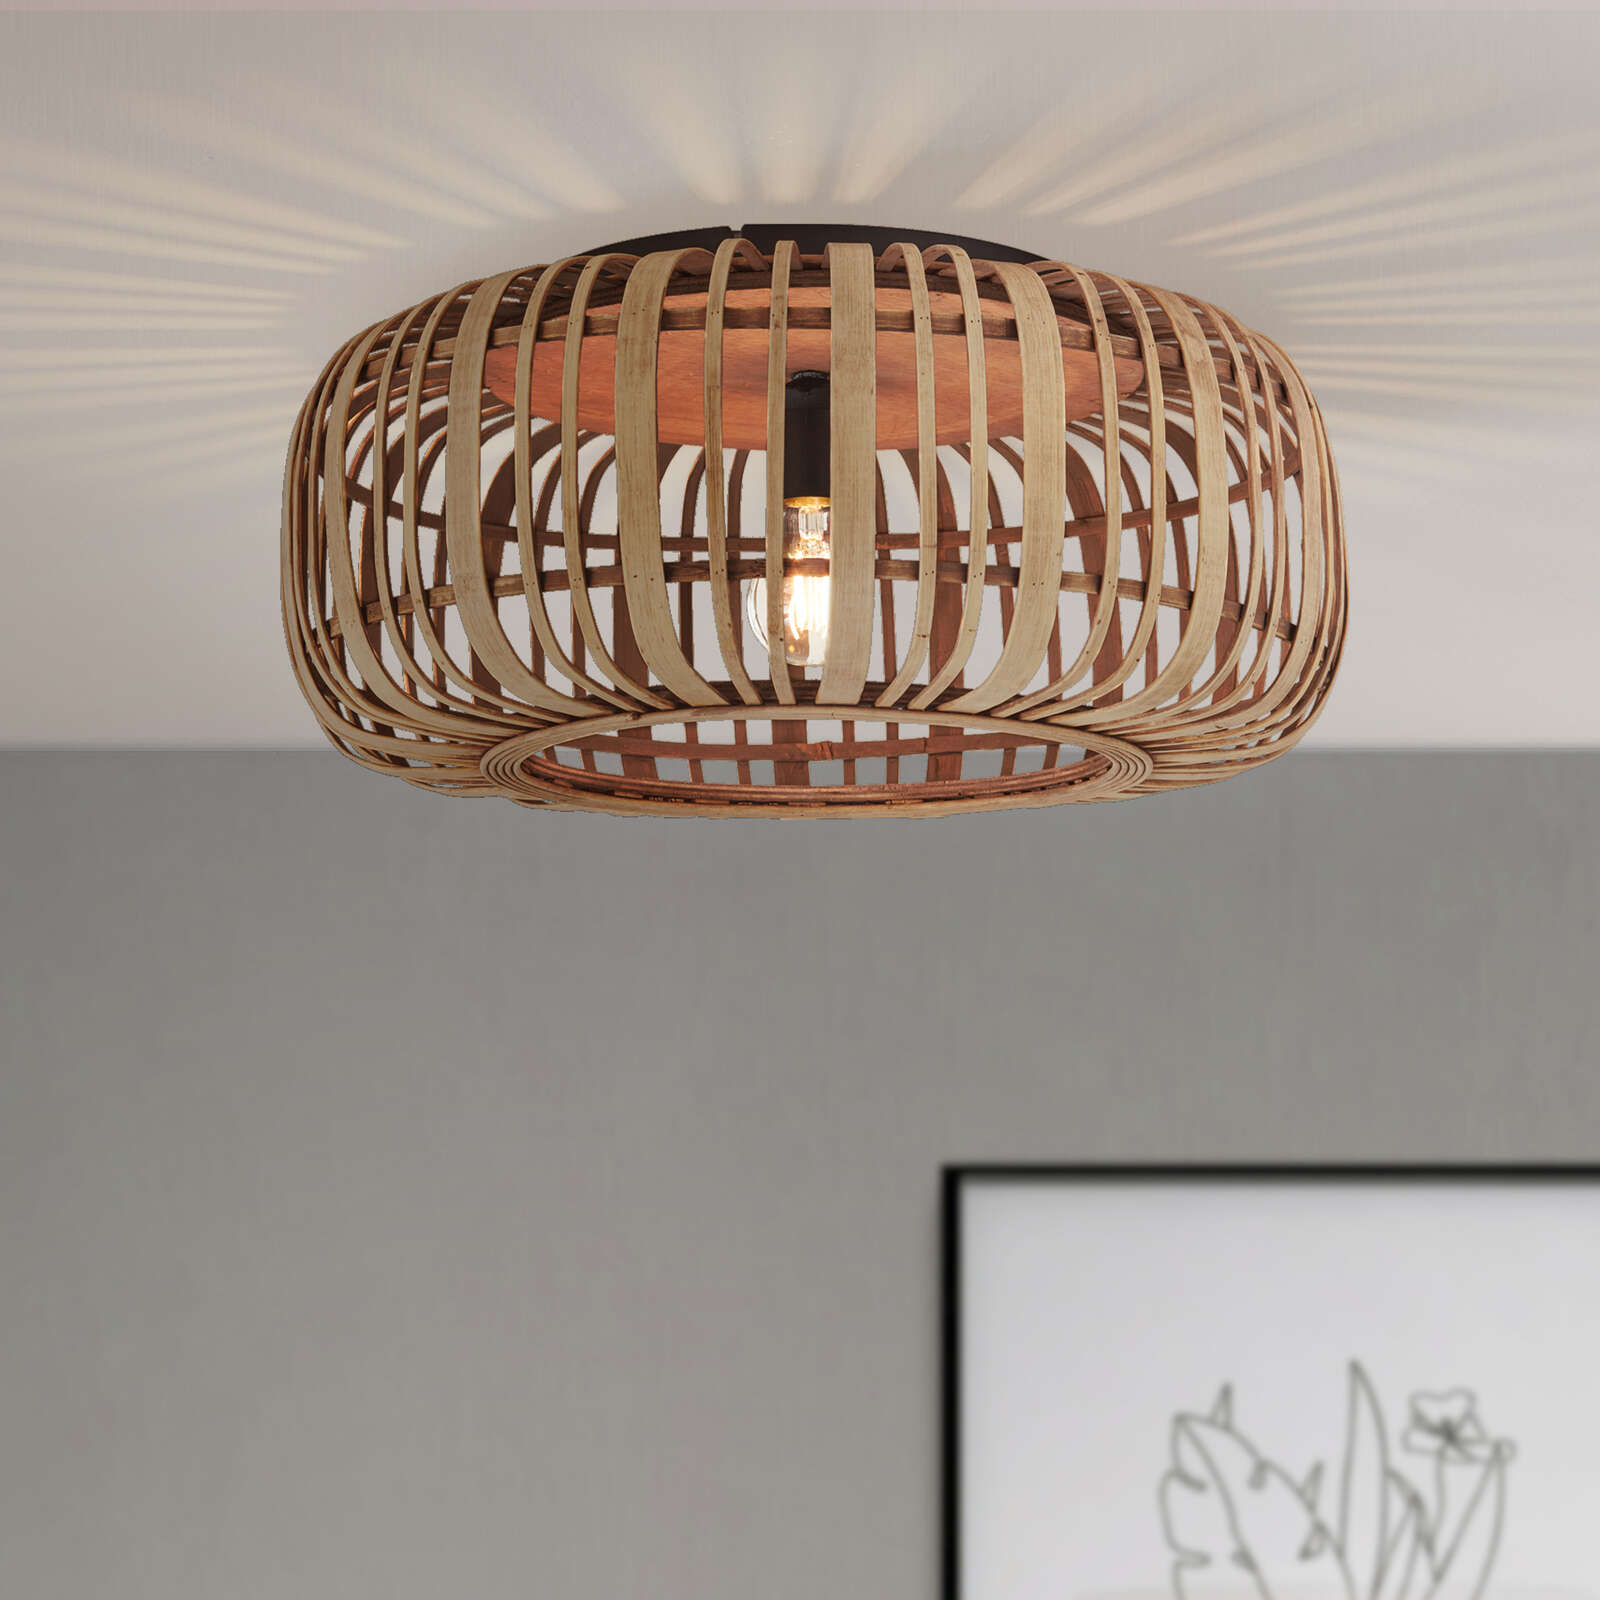             Bamboo ceiling light - Willi 10 - Brown
        